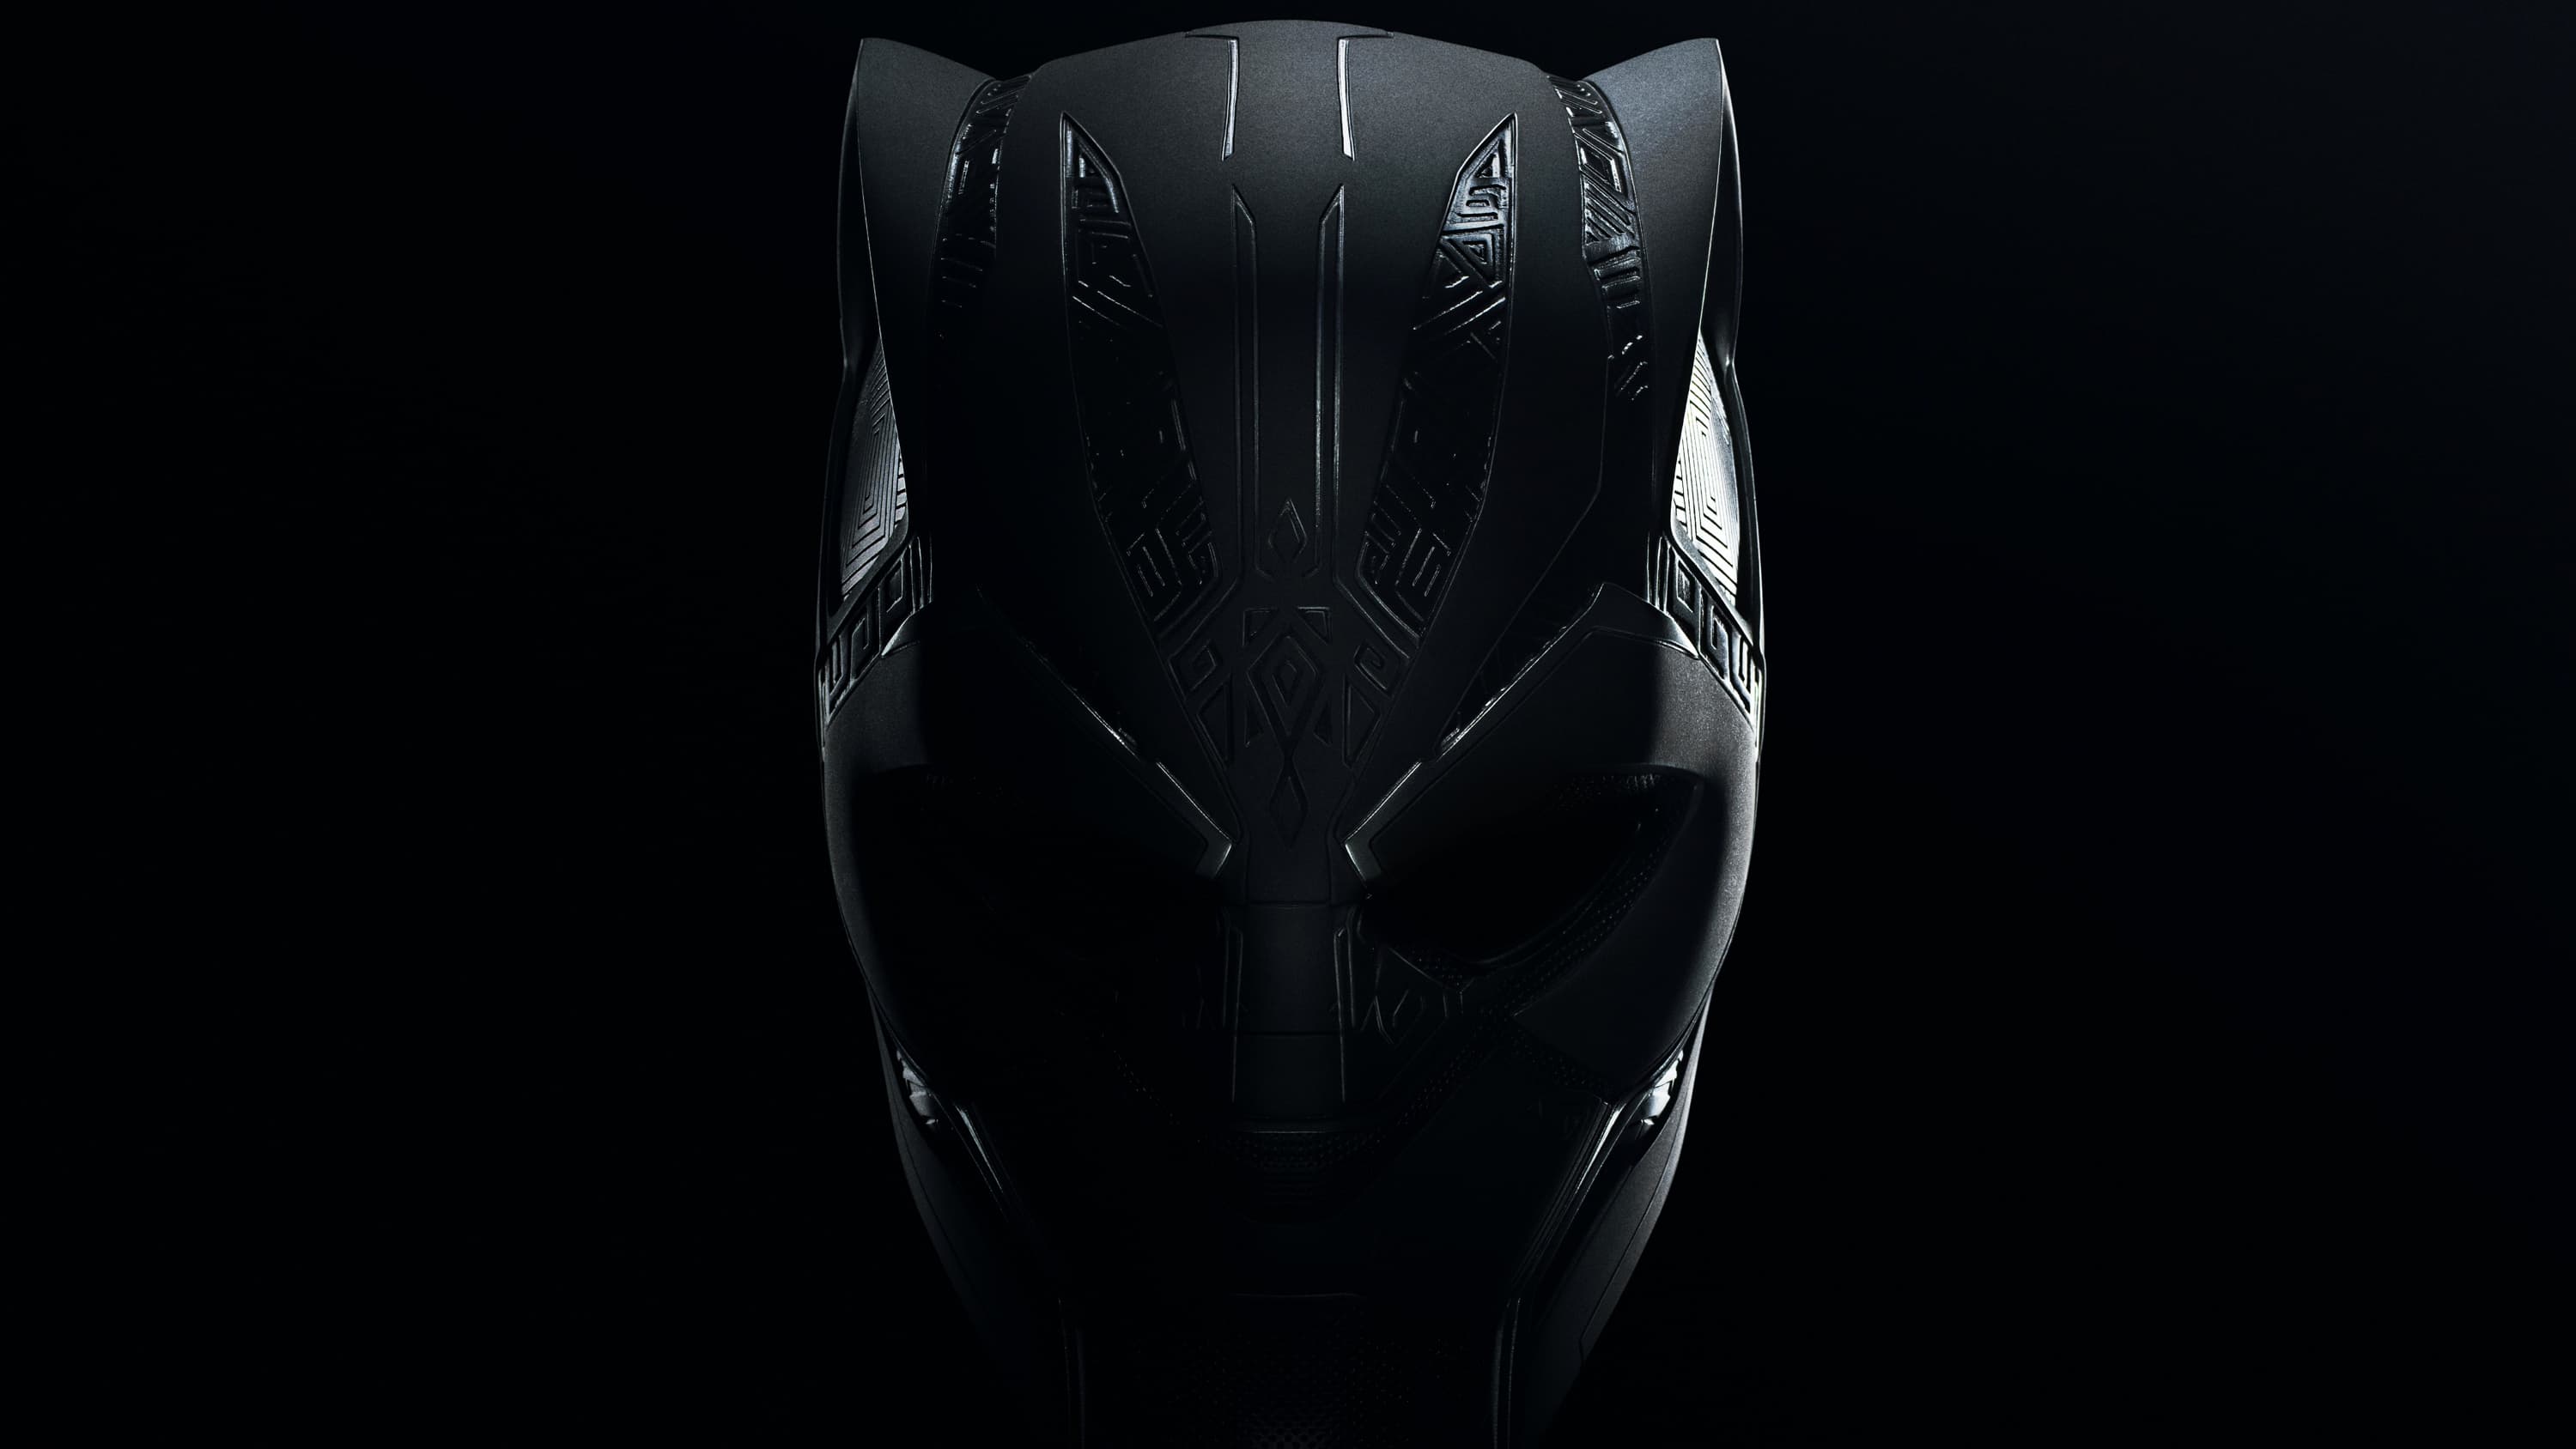 Black Panther Wakanda Forever 22 Forever Fullmovie Download Free On 123 Movies Xiaomi Community